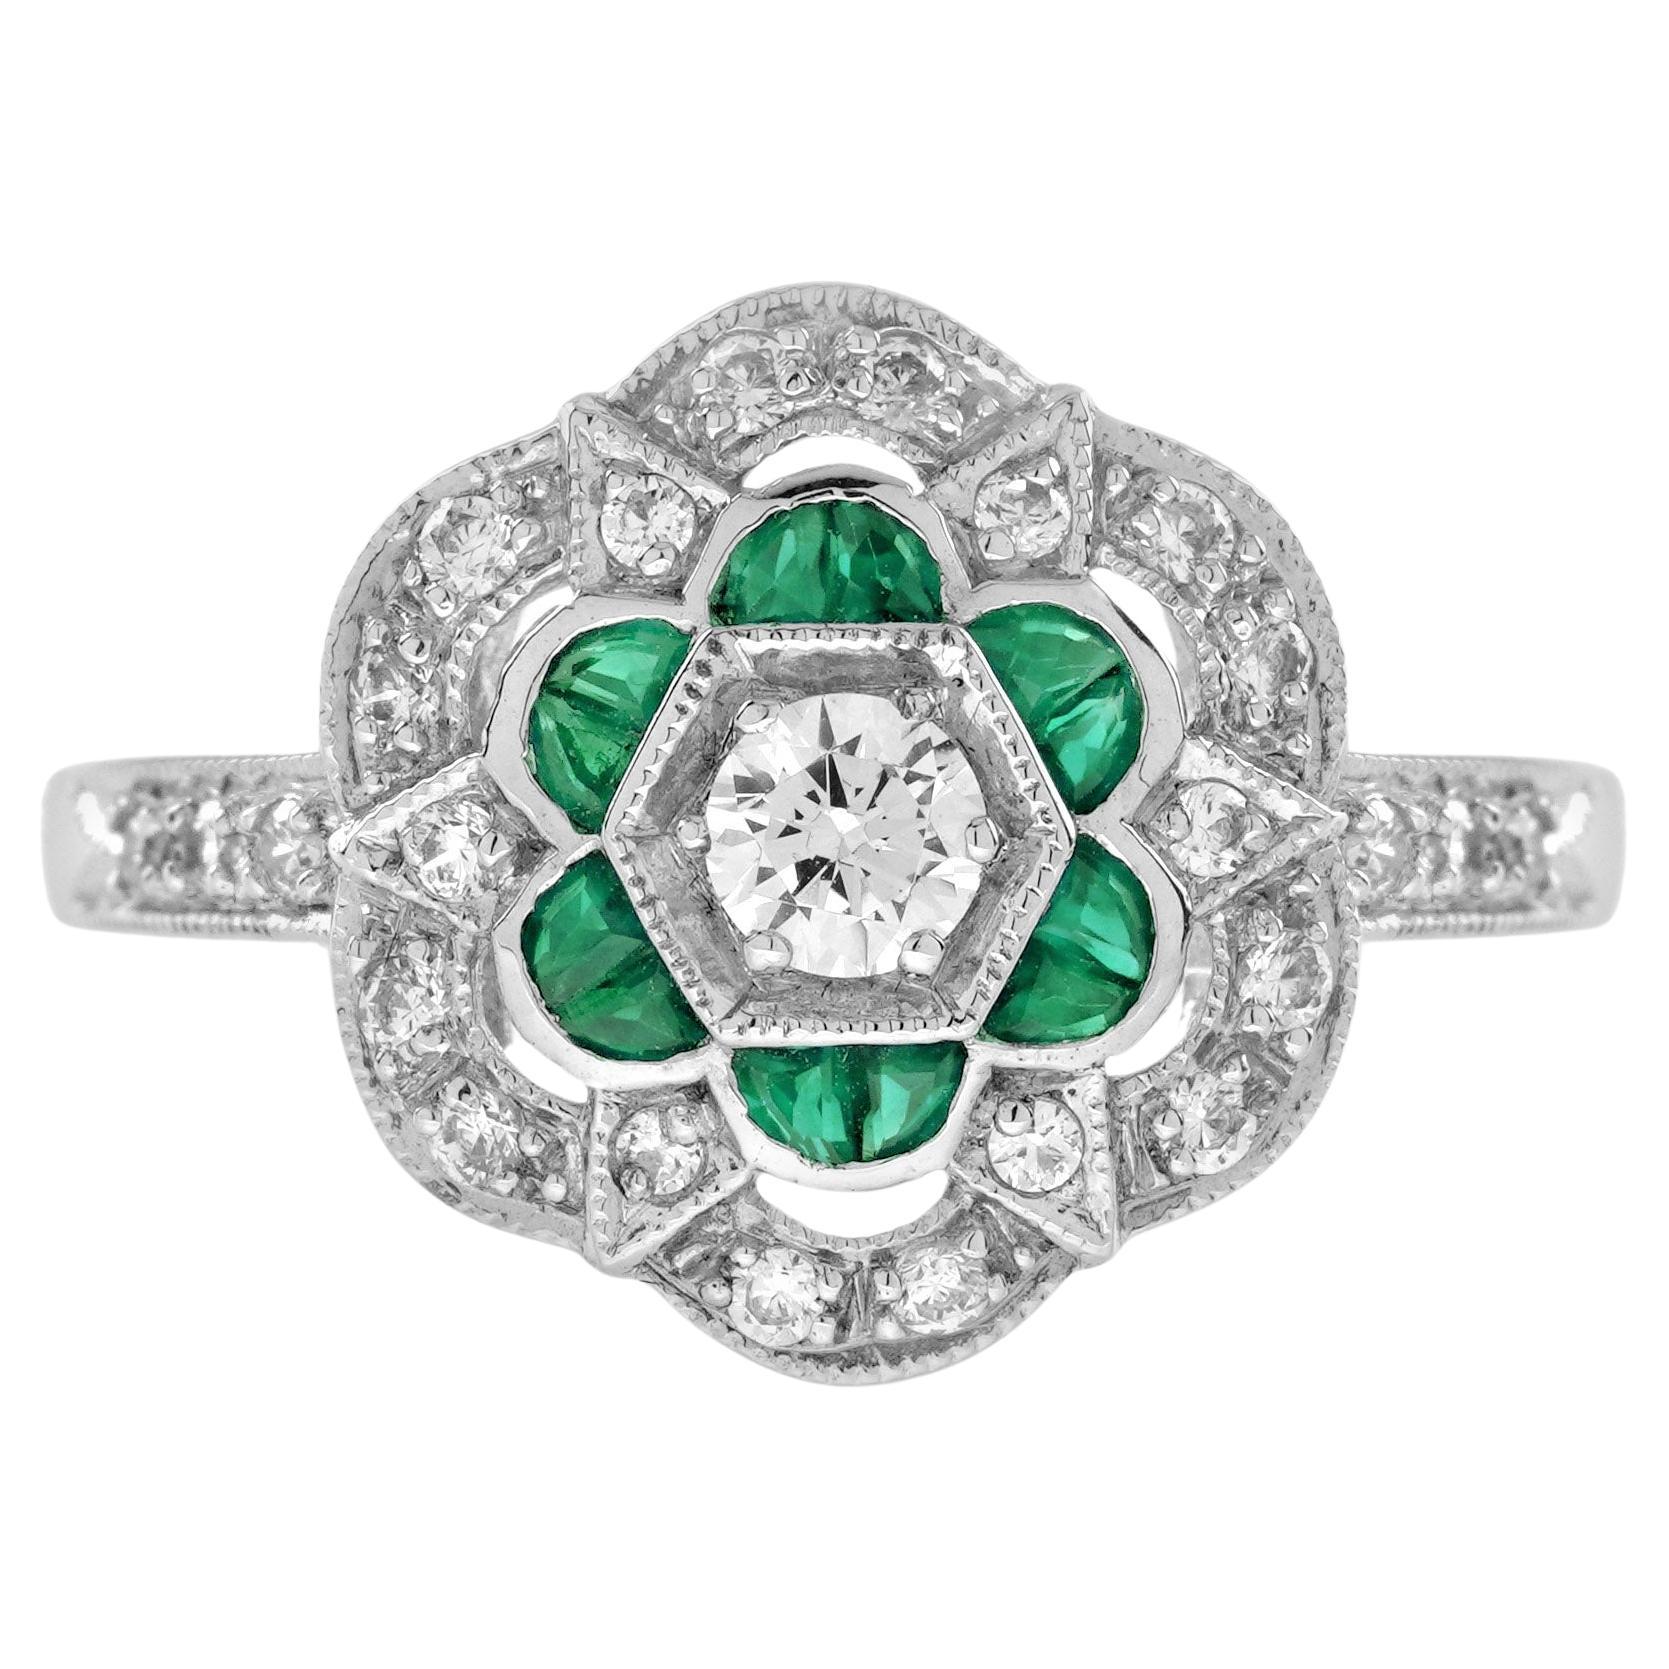 Diamond and Emerald Art Deco Style Floral Engagement Ring in 18K White Gold